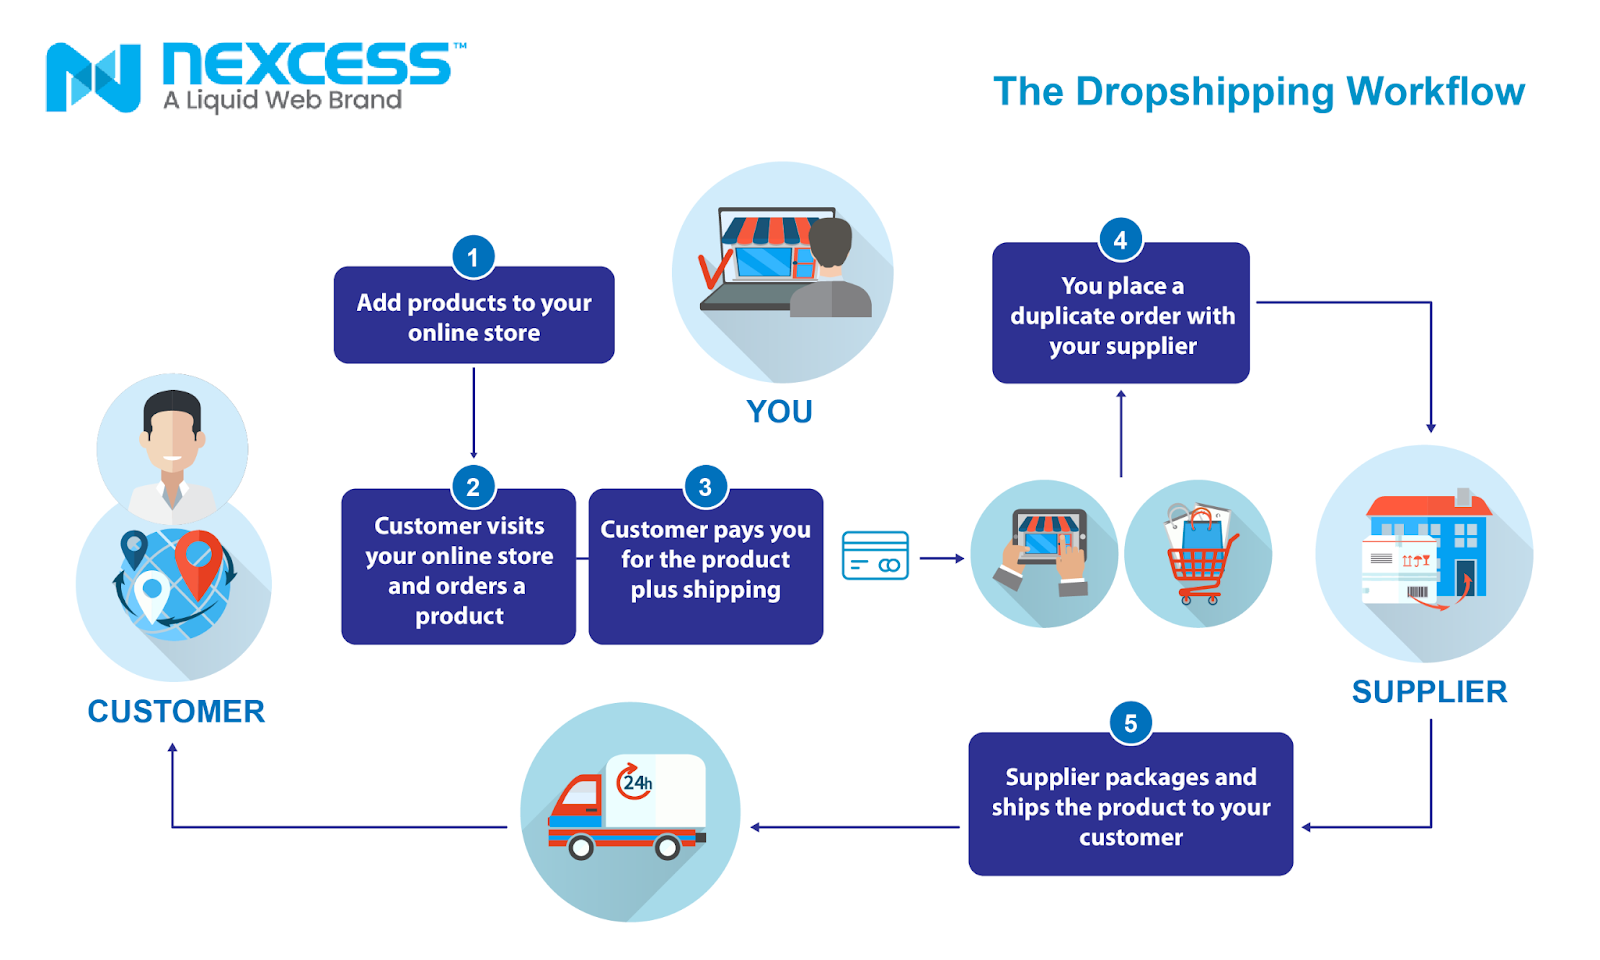 Basic workflow of the dropshipping fulfillment method